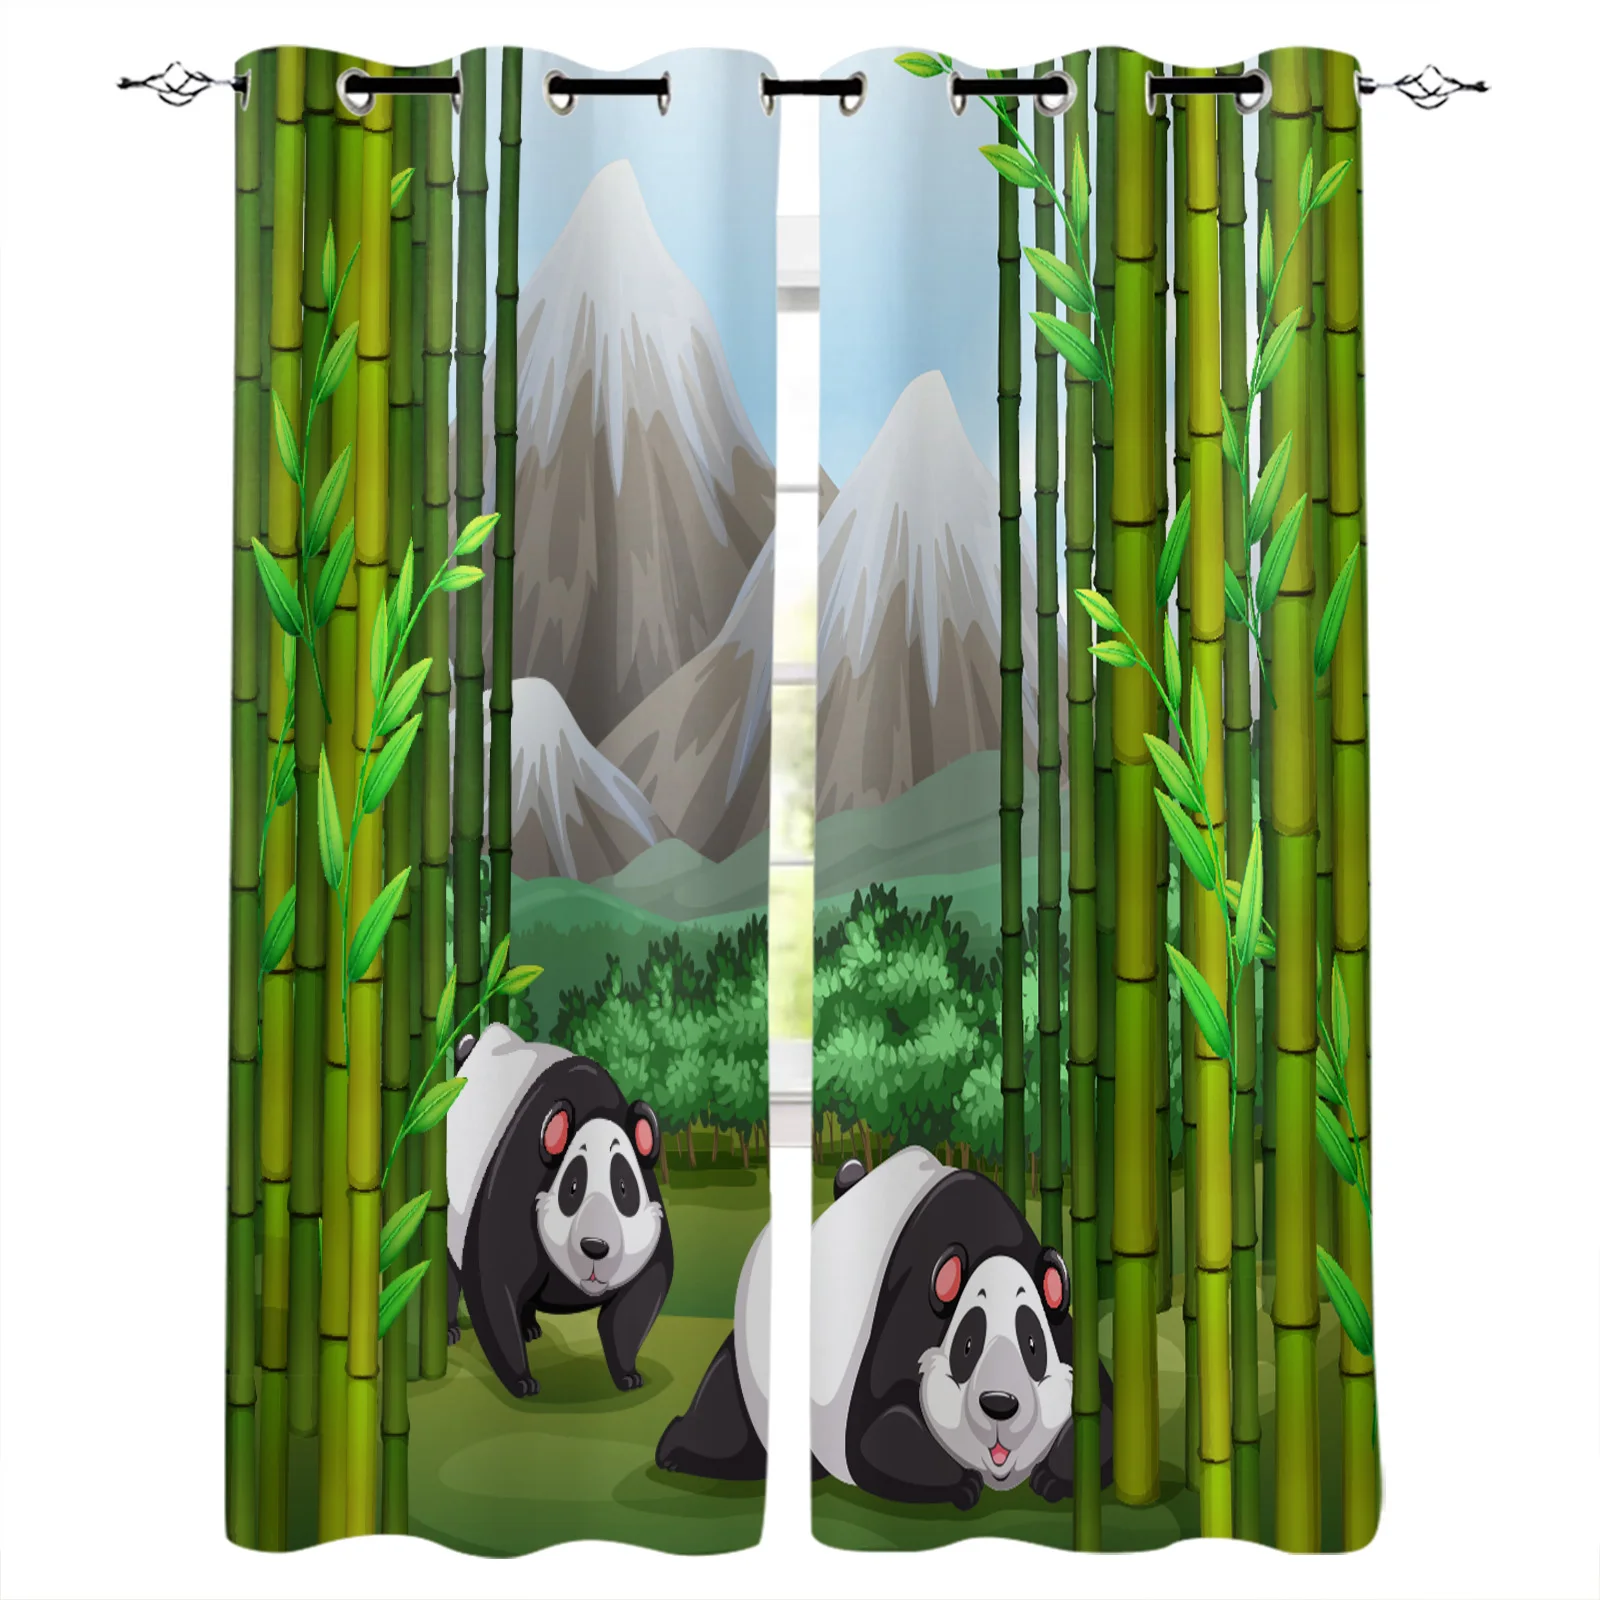 Bamboo Forest Arbor Panda Shrub Hillock Curtains In The Bedroom Living Room Hall for Home Kitchen Window Treatments Drapes images - 1